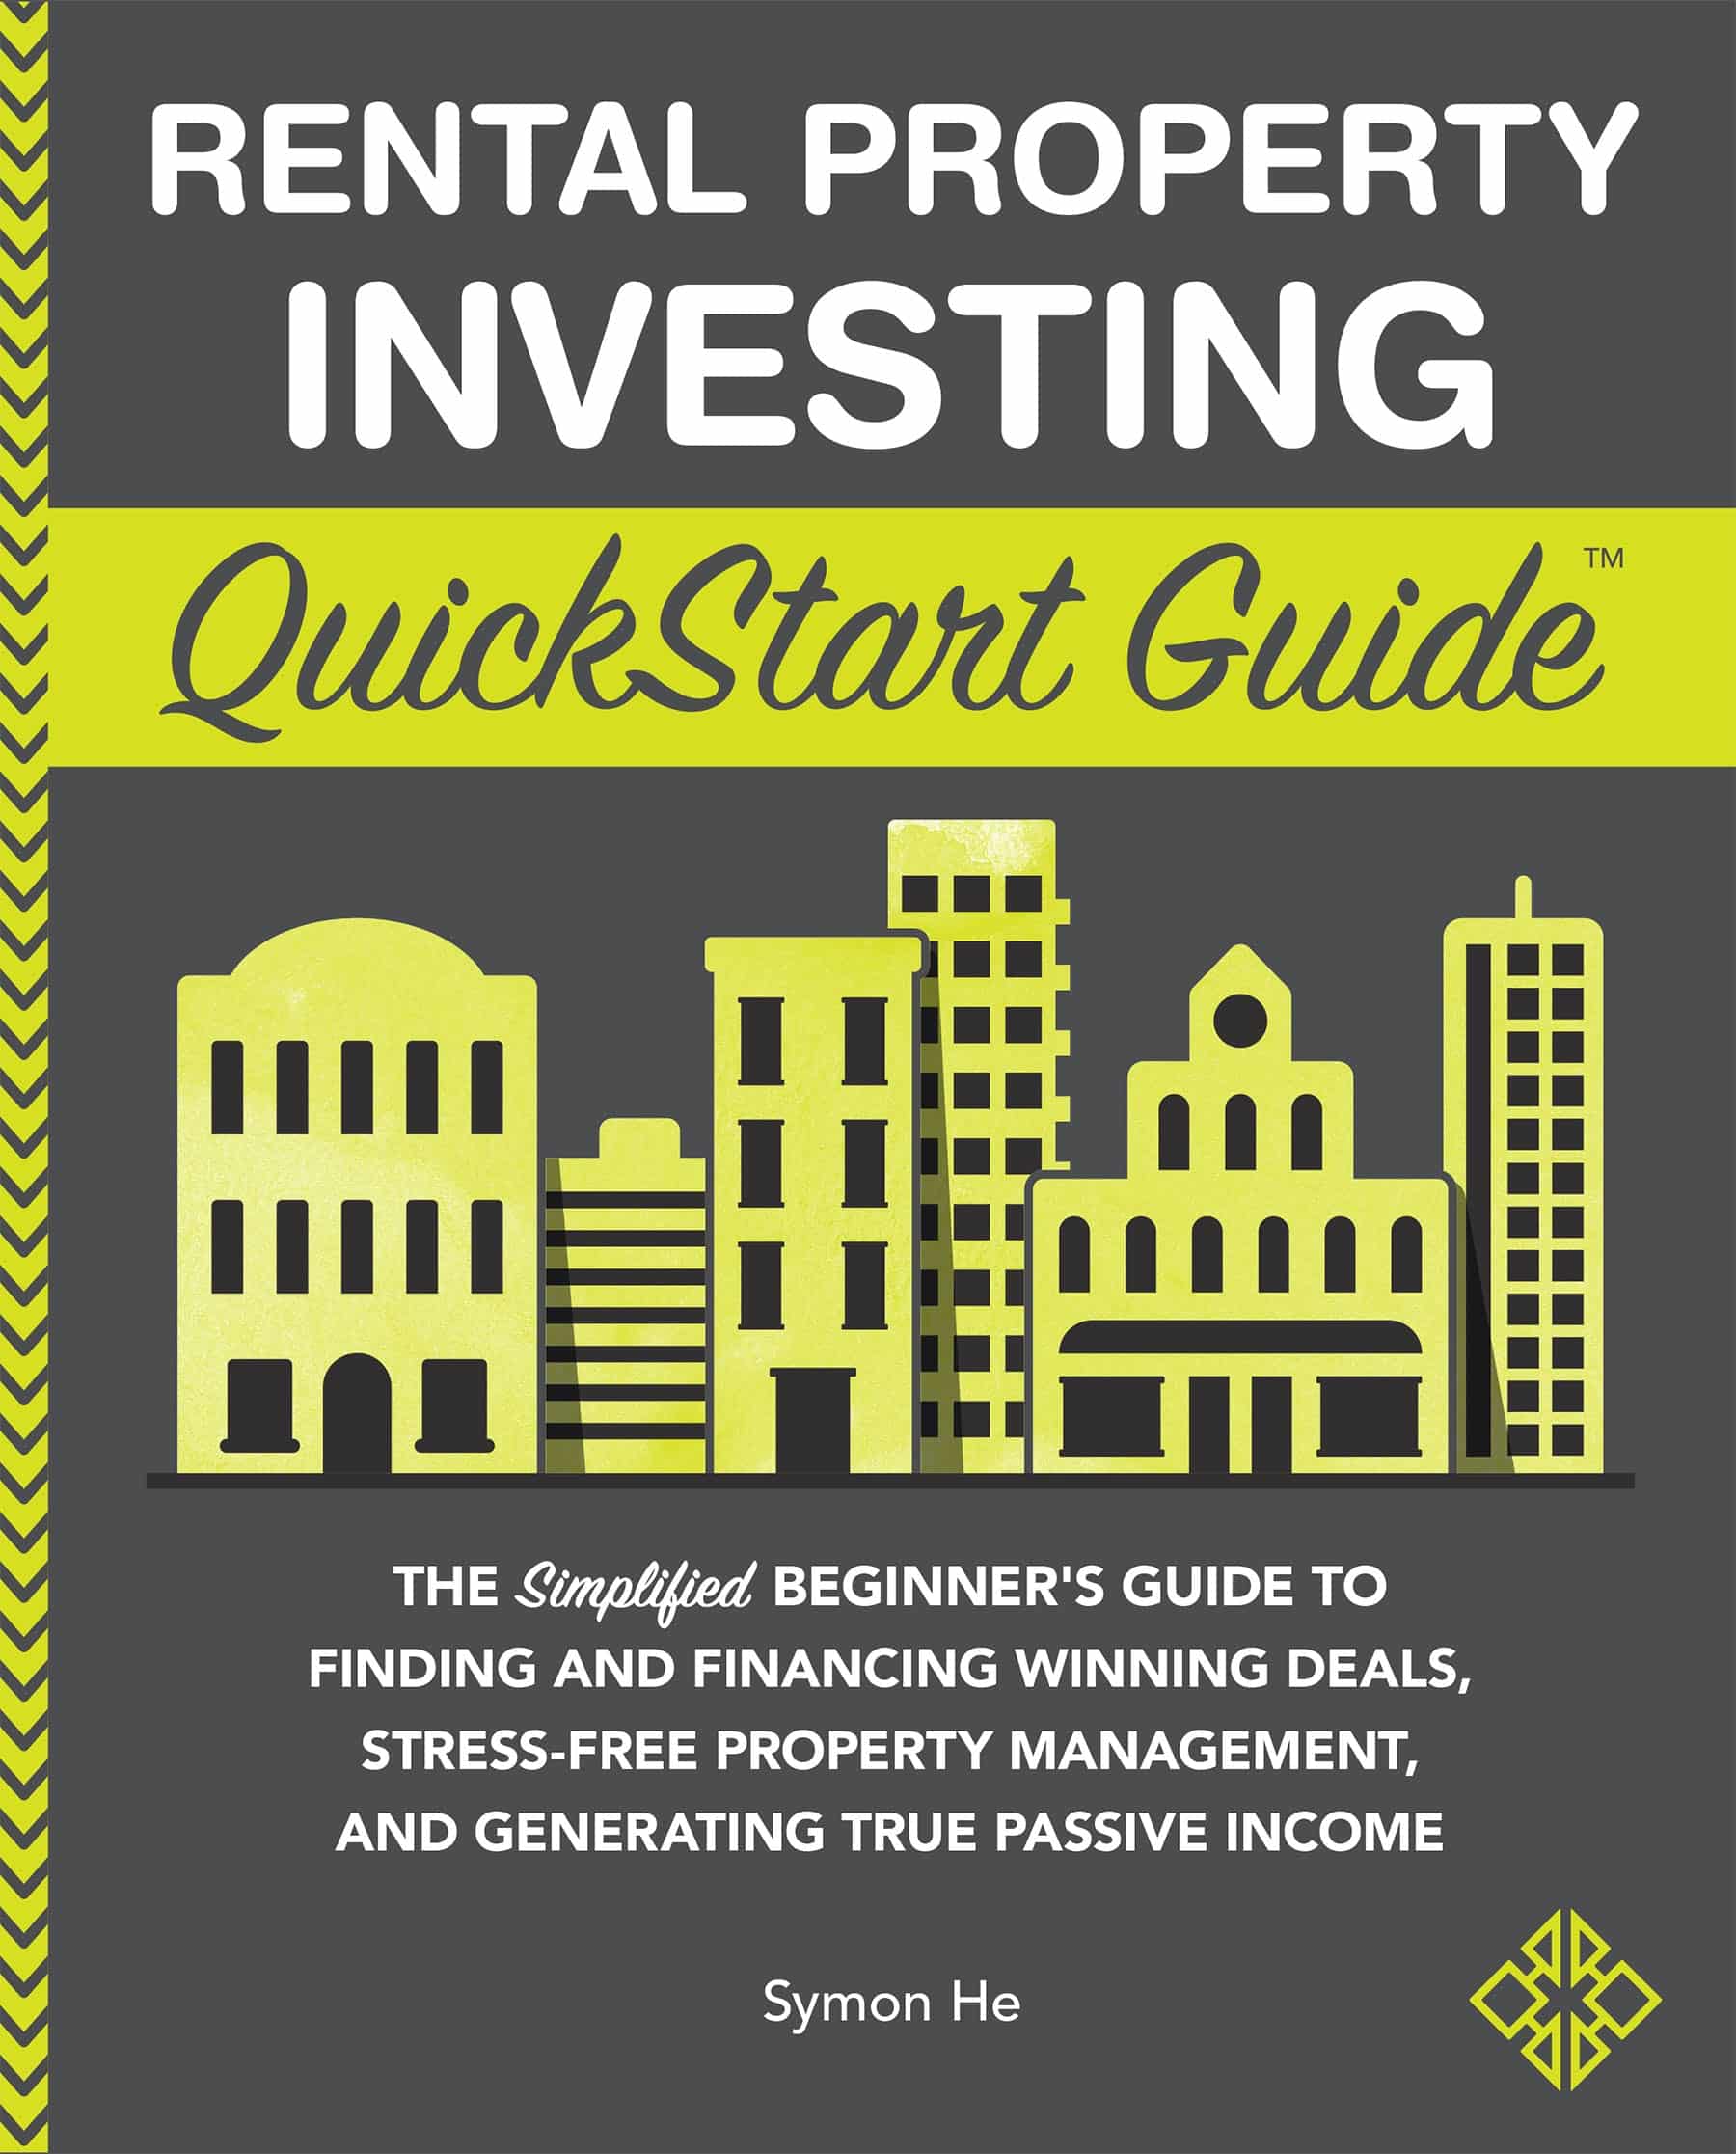 Rental Property Investing QuickStart Guide Cover